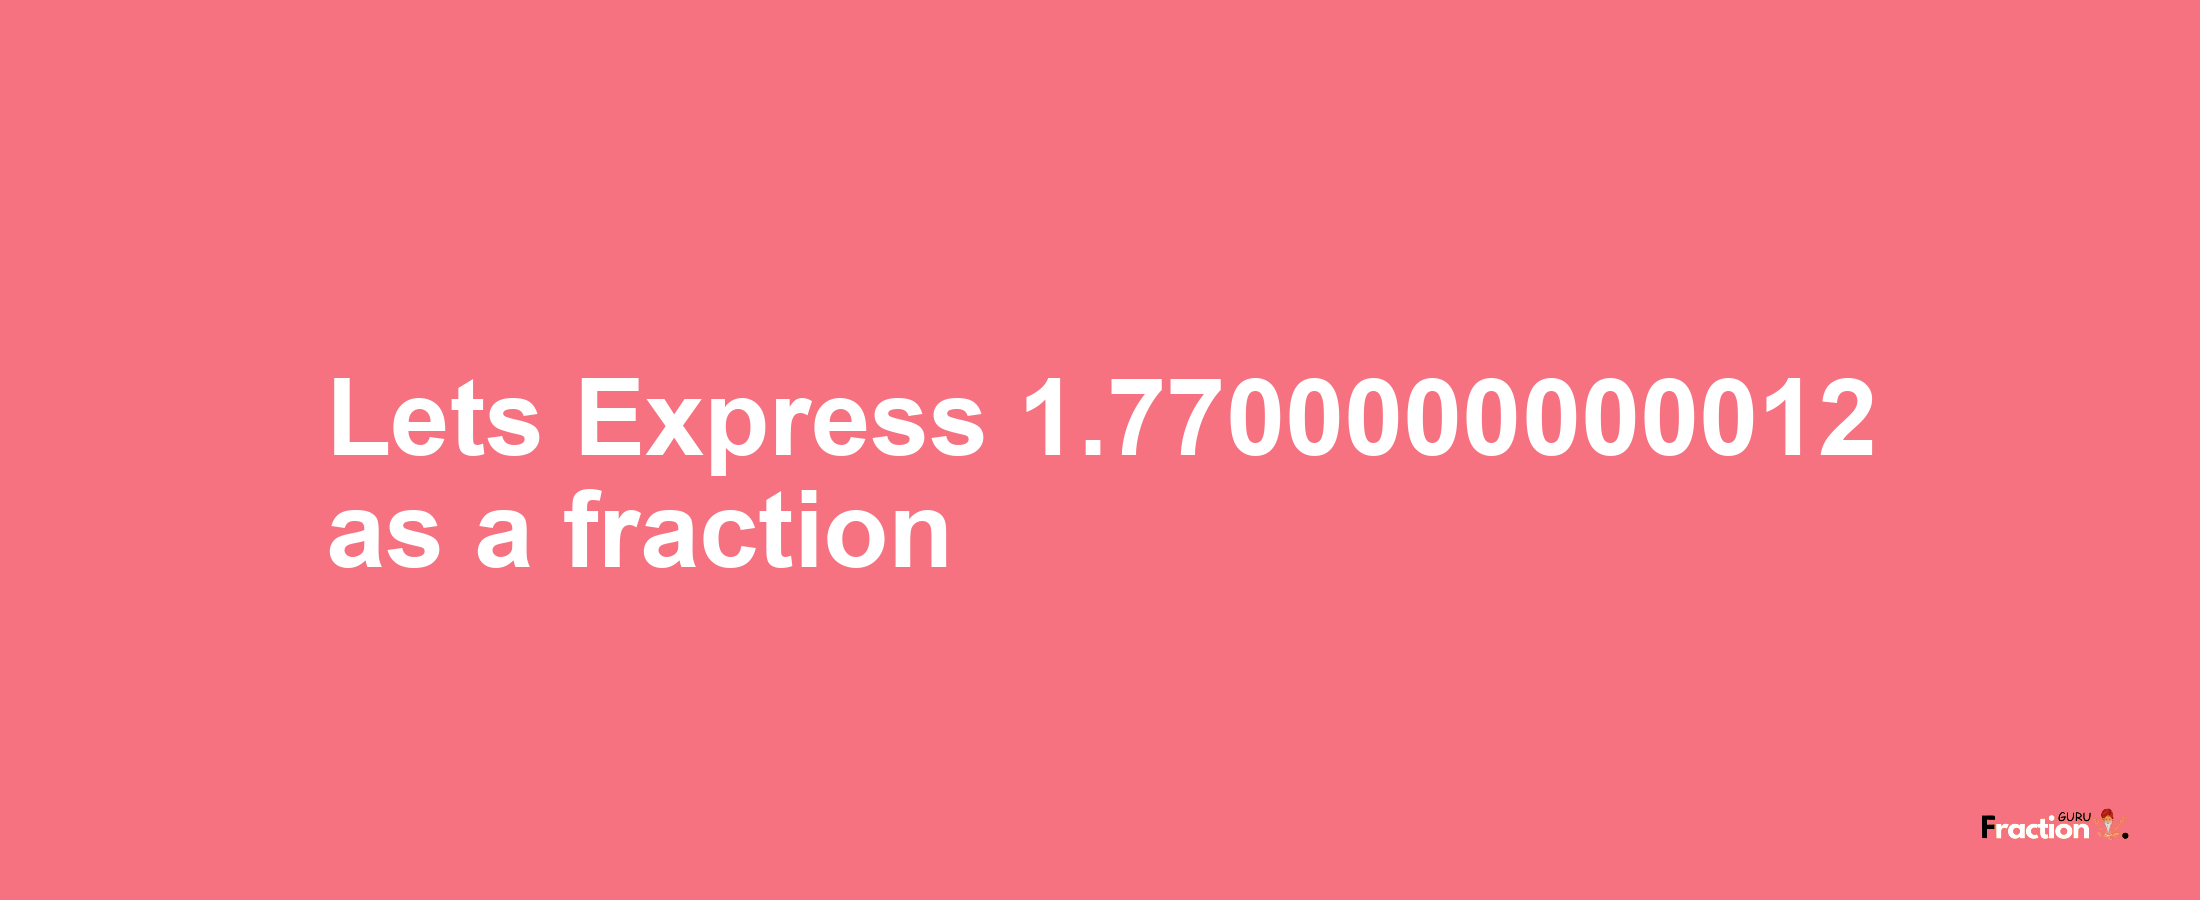 Lets Express 1.7700000000012 as afraction